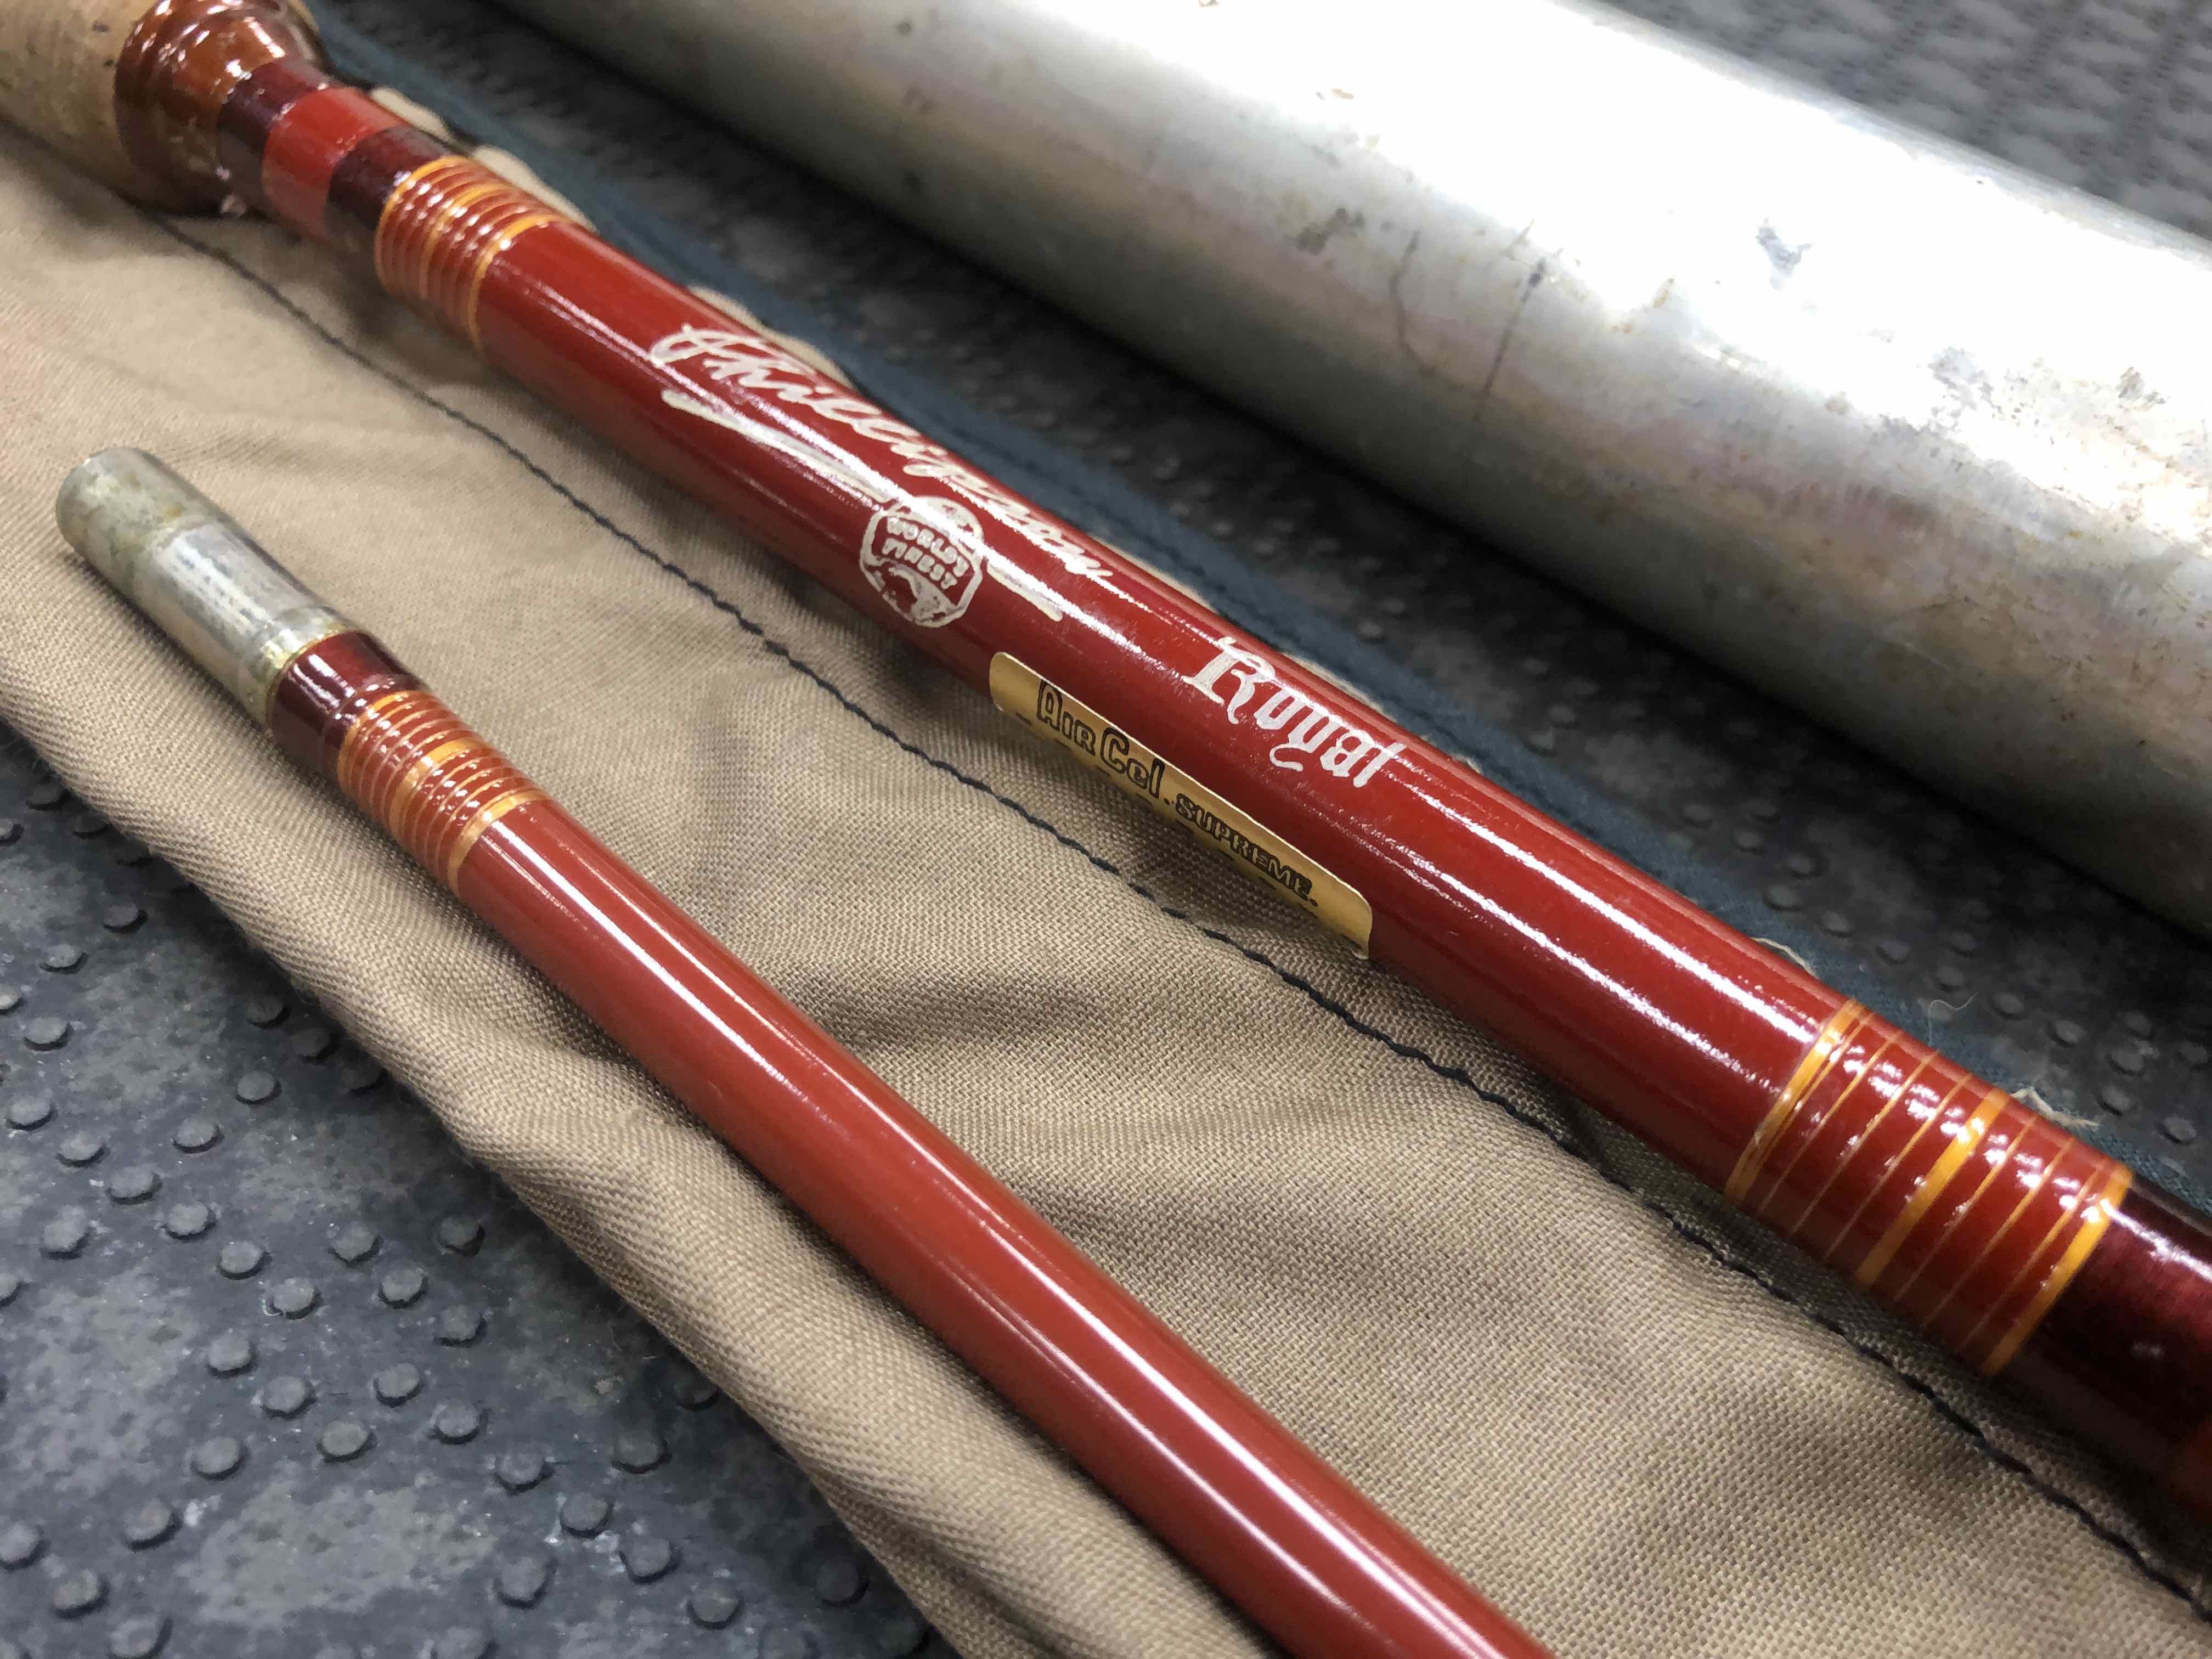 Vintage Phillipson Royal - 9’ - 10wt - RF90HT G2AF 10 - Made in the USA - 2Pc - Fiberglass Fly Rod - GREAT SHAPE! - $125